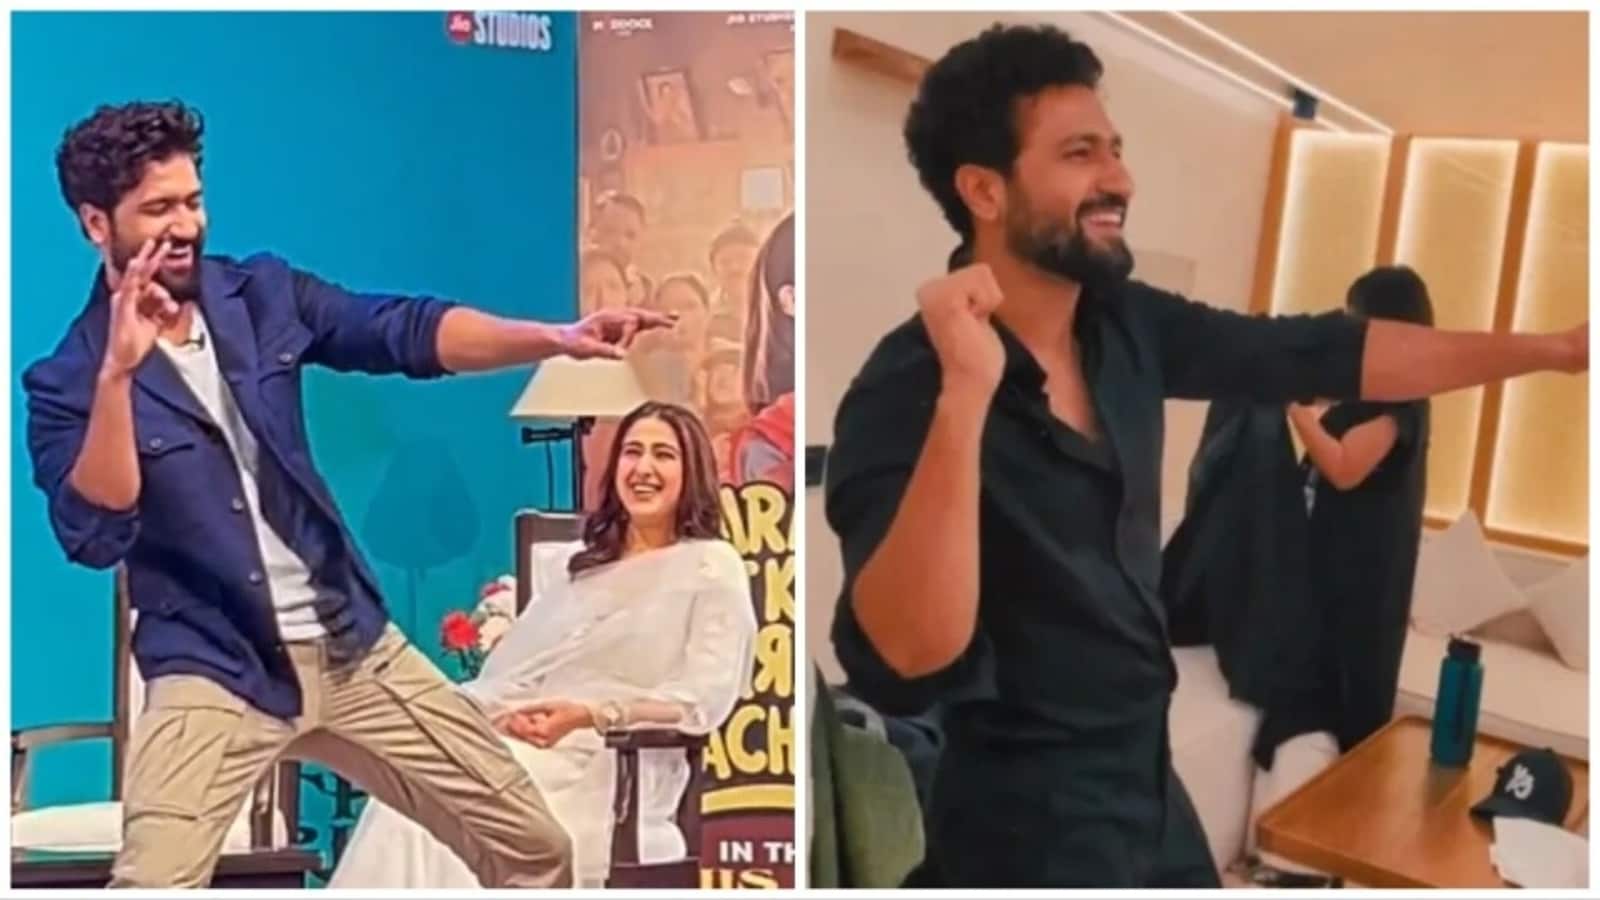 Vicky Kaushal Recreates Her Viral Obsessed Dance Video Live On Stage At Event, Internet 'Can't Stop Watching'